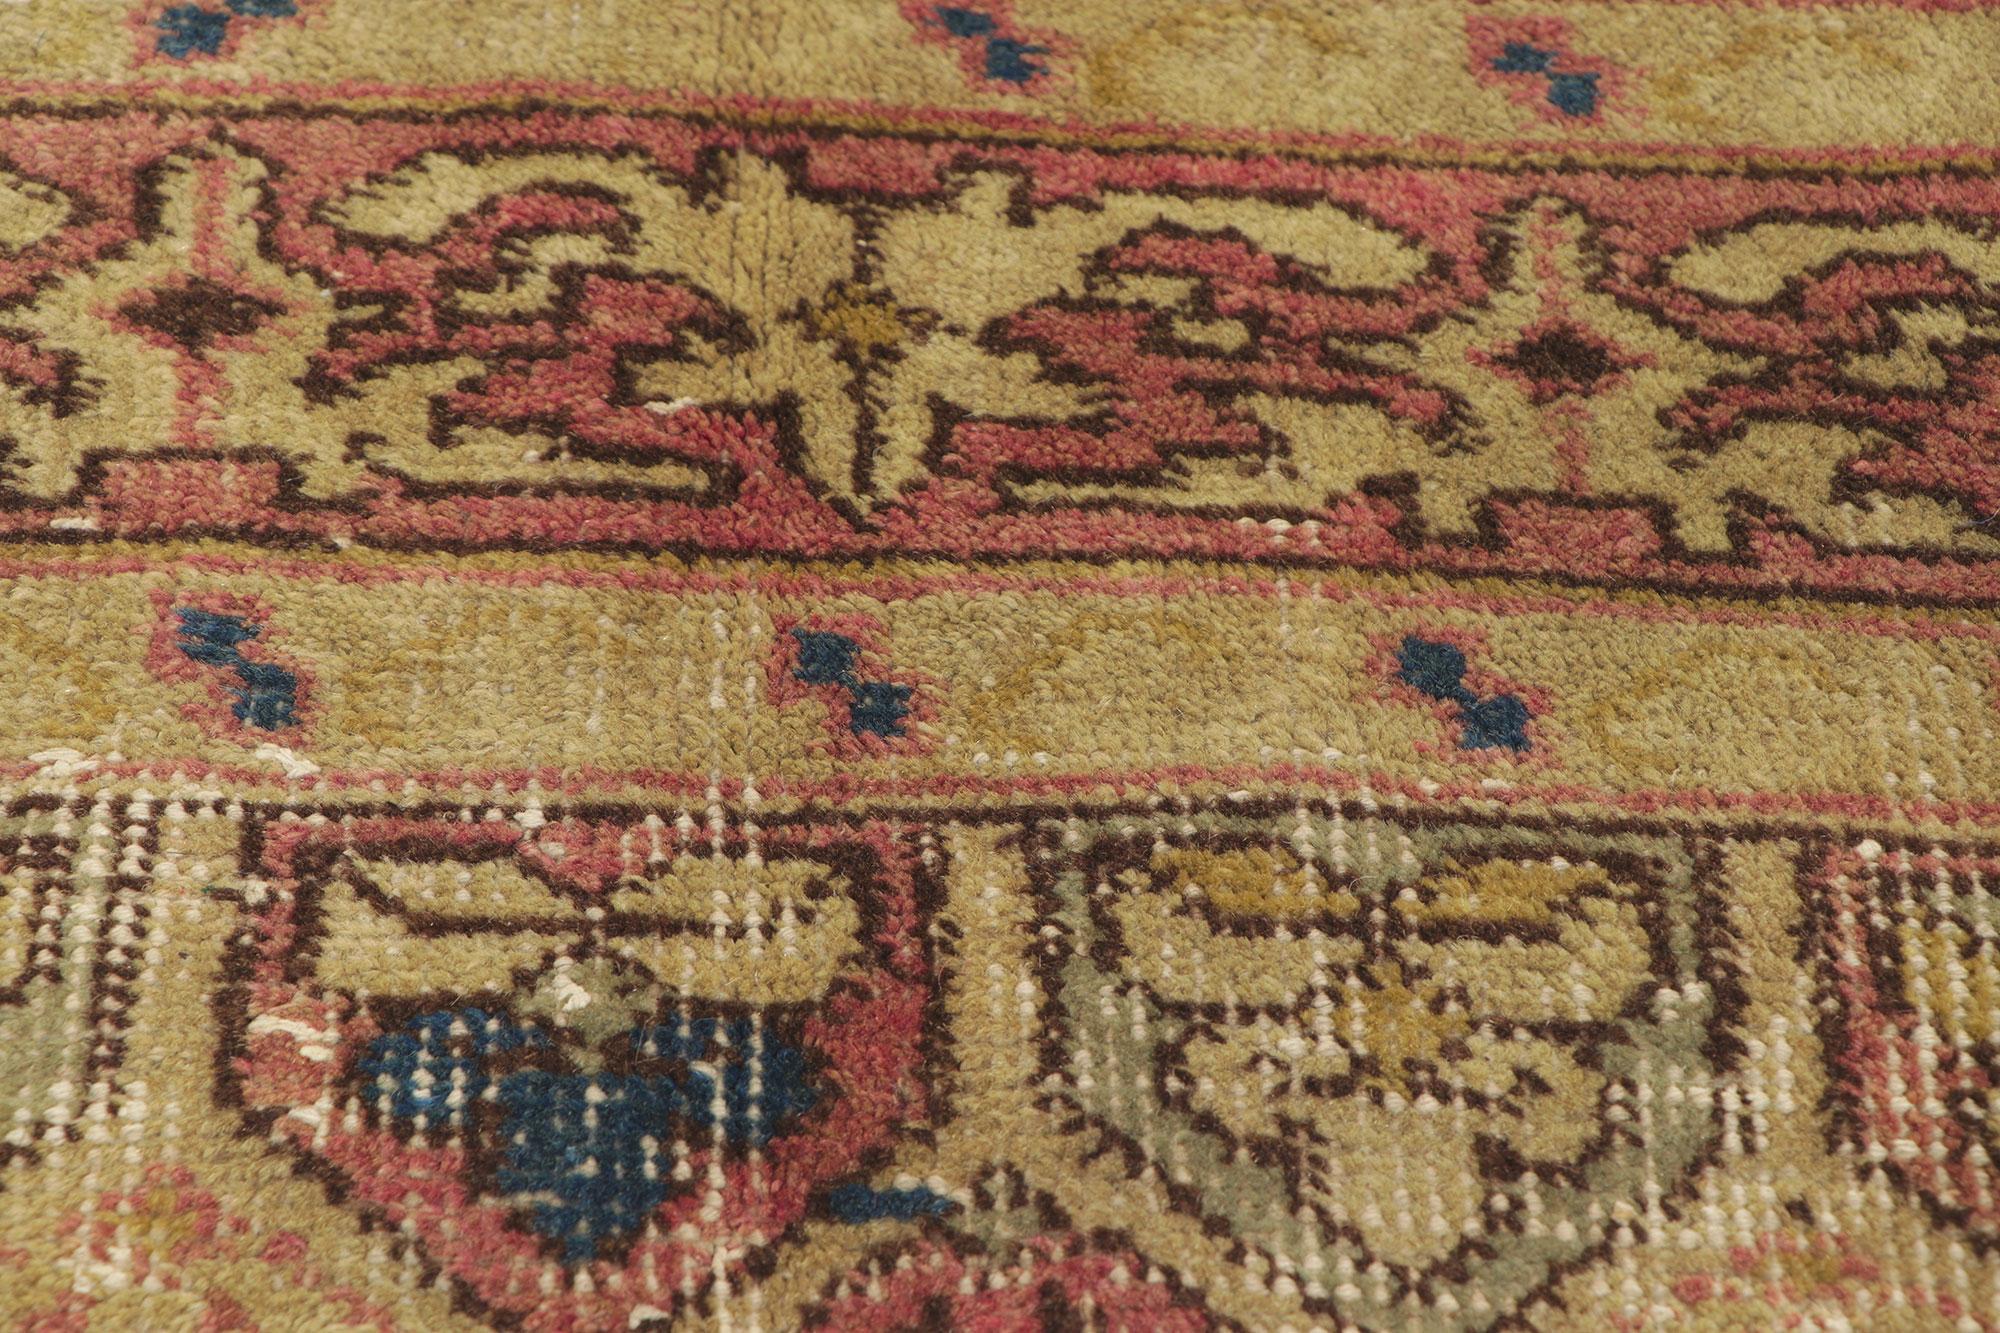 Pair of Matching Vintage Turkish Sivas Rugs with Rustic Earth-Tone Colors For Sale 6